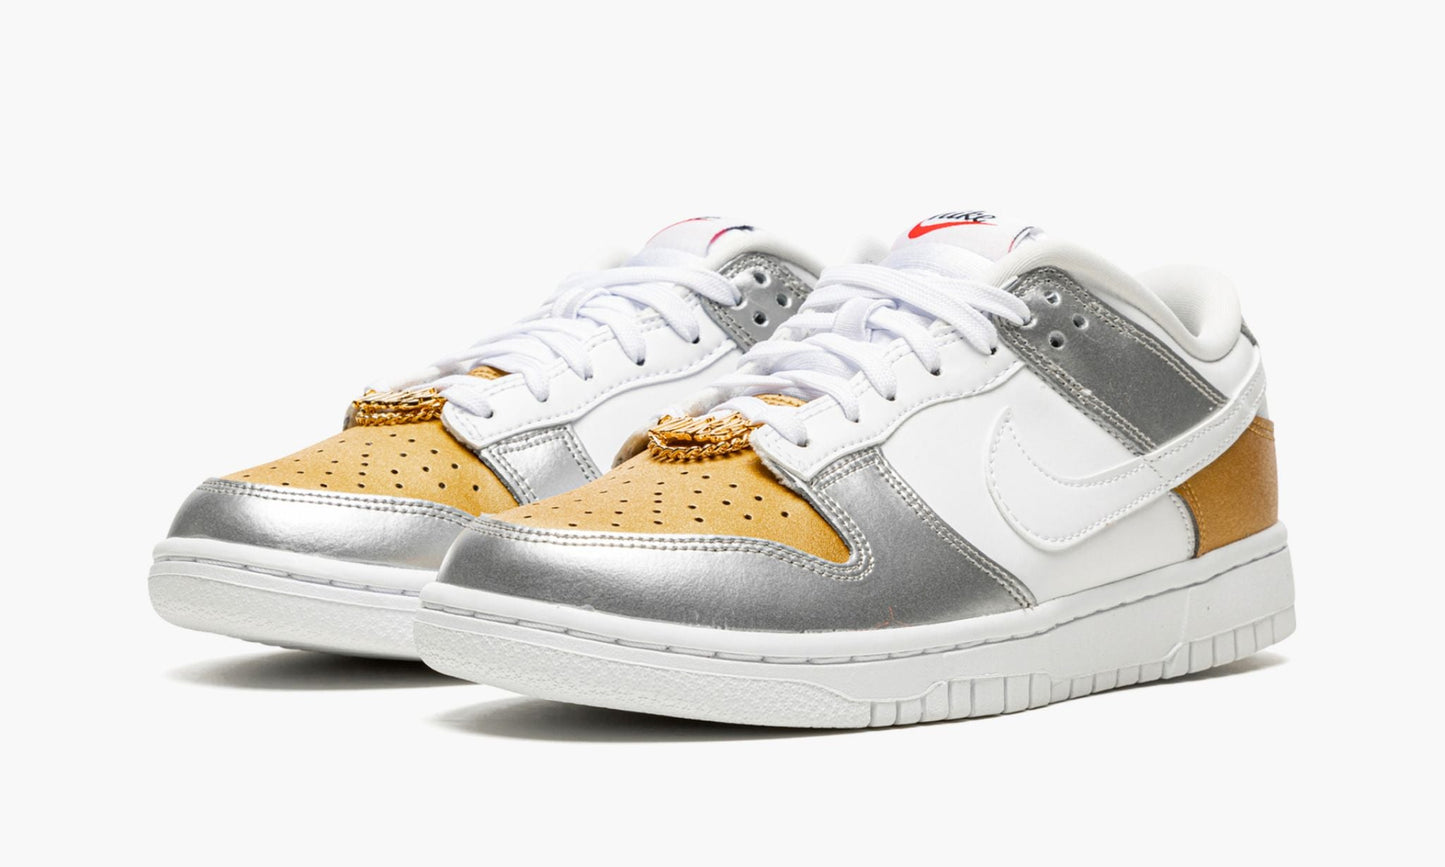 Dunk Low WMNS "Gold White Silver"